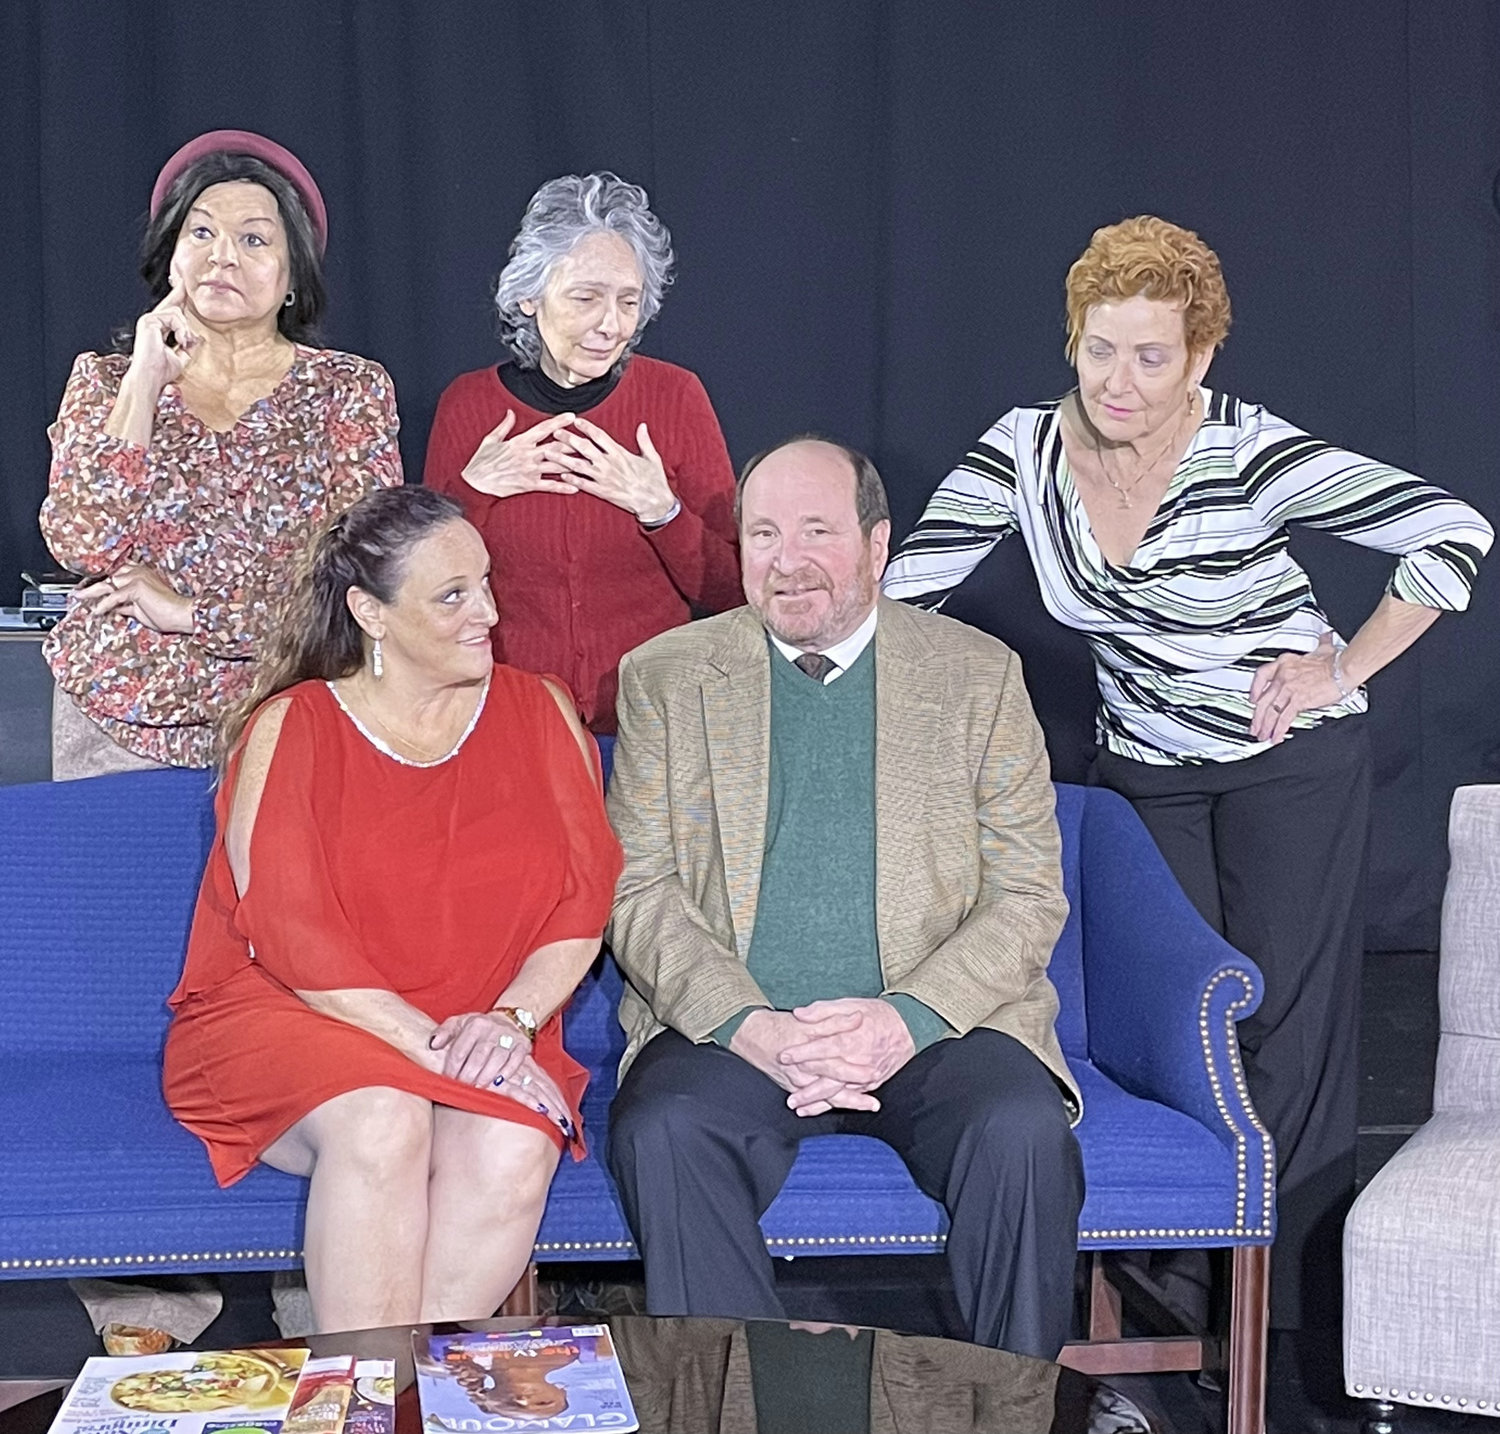 Seated from left are Anita Getz and Jay Steinberg; standing from left are Gina Stevens, Ann D’Silva and Linda Gold.